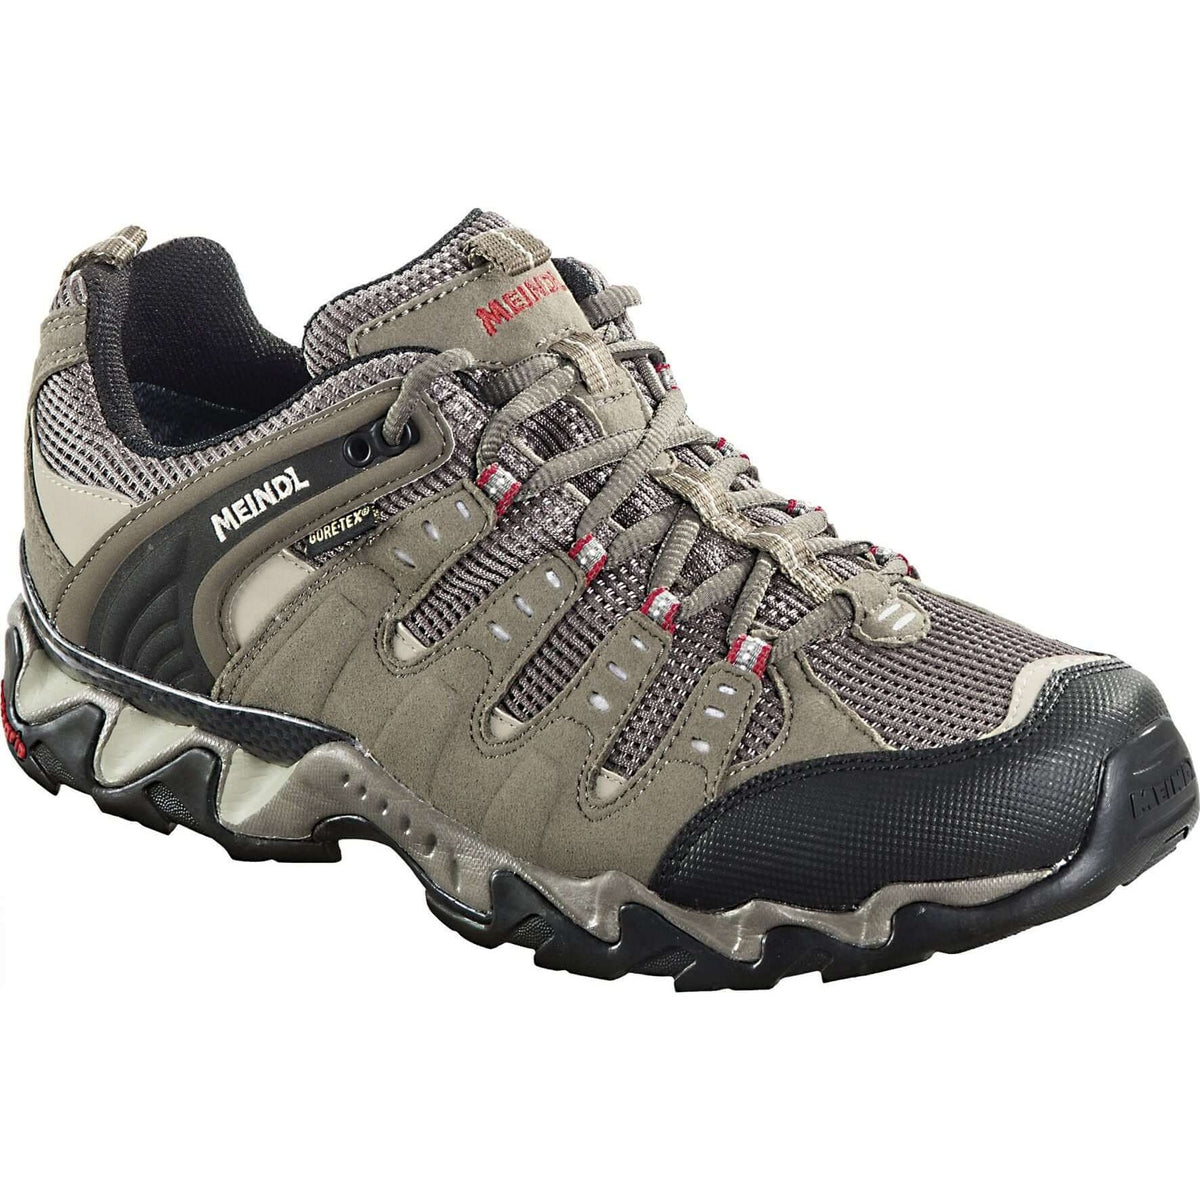 Meindl Respond GTX Walking Shoes - Reed/Red